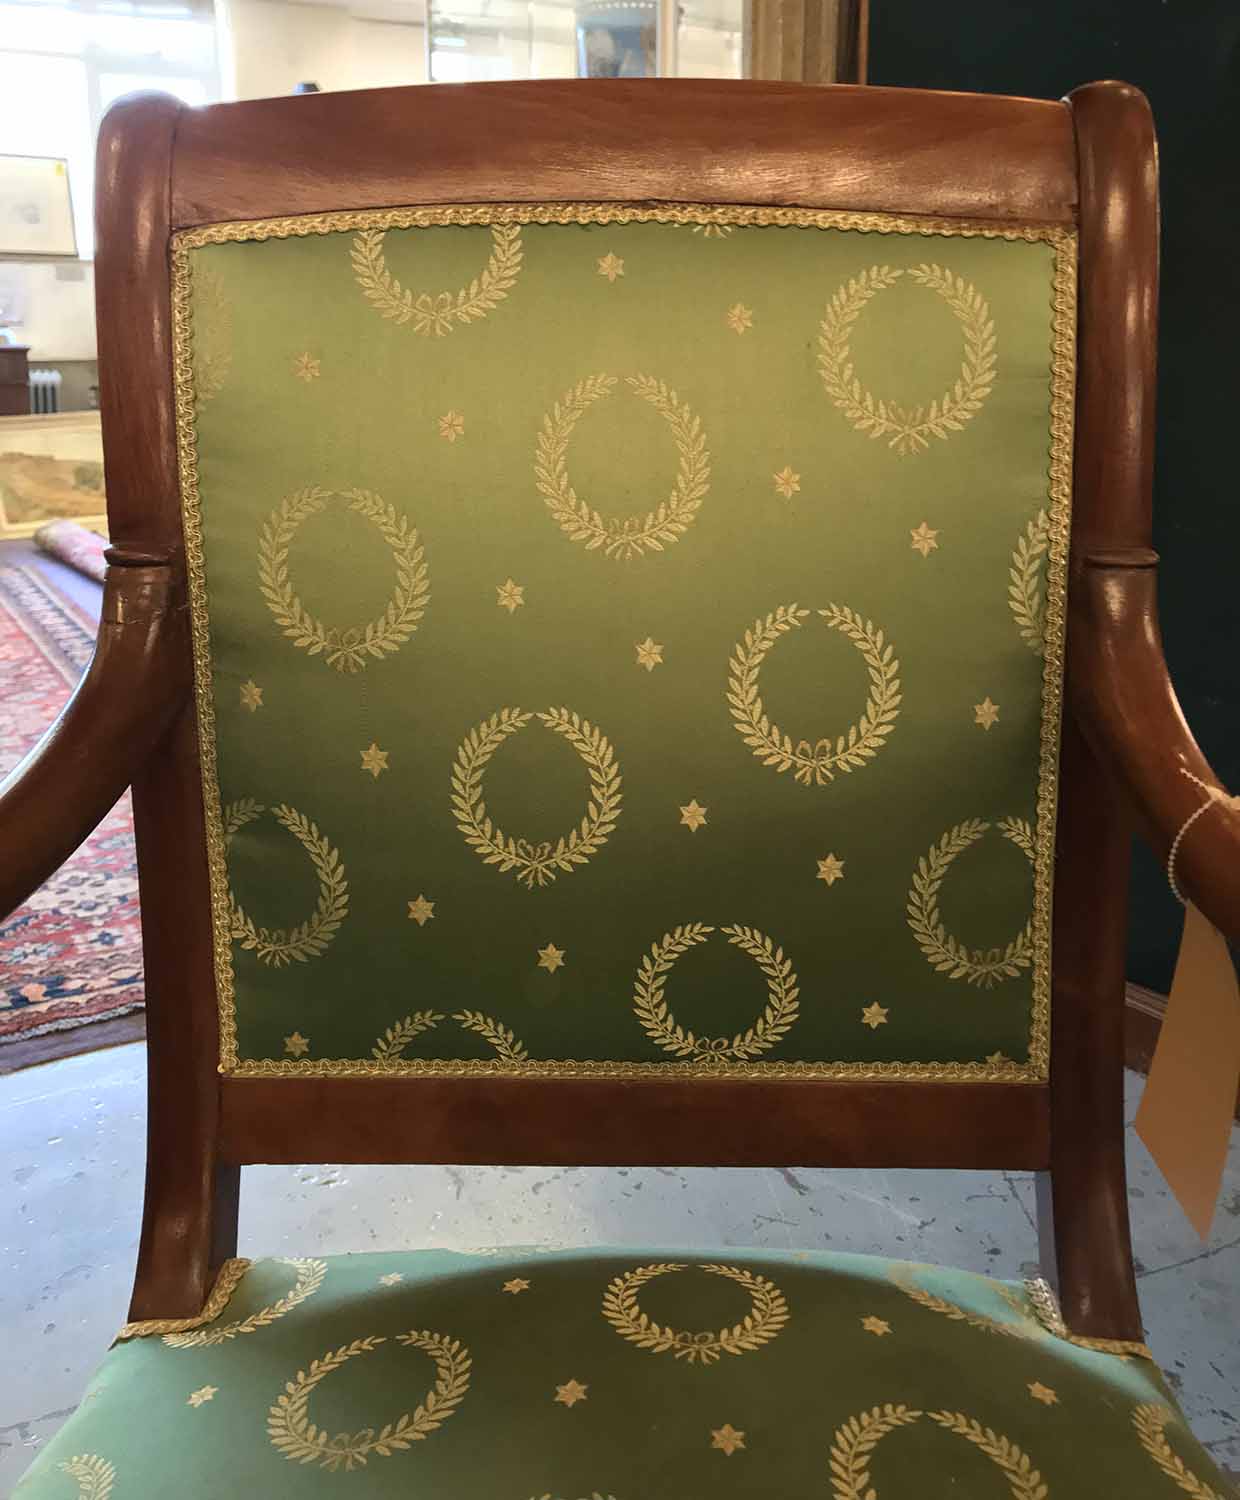 FAUTEUILS, a pair, early 19th century French Charles X mahogany with Empire green silk upholstery. - Image 2 of 2